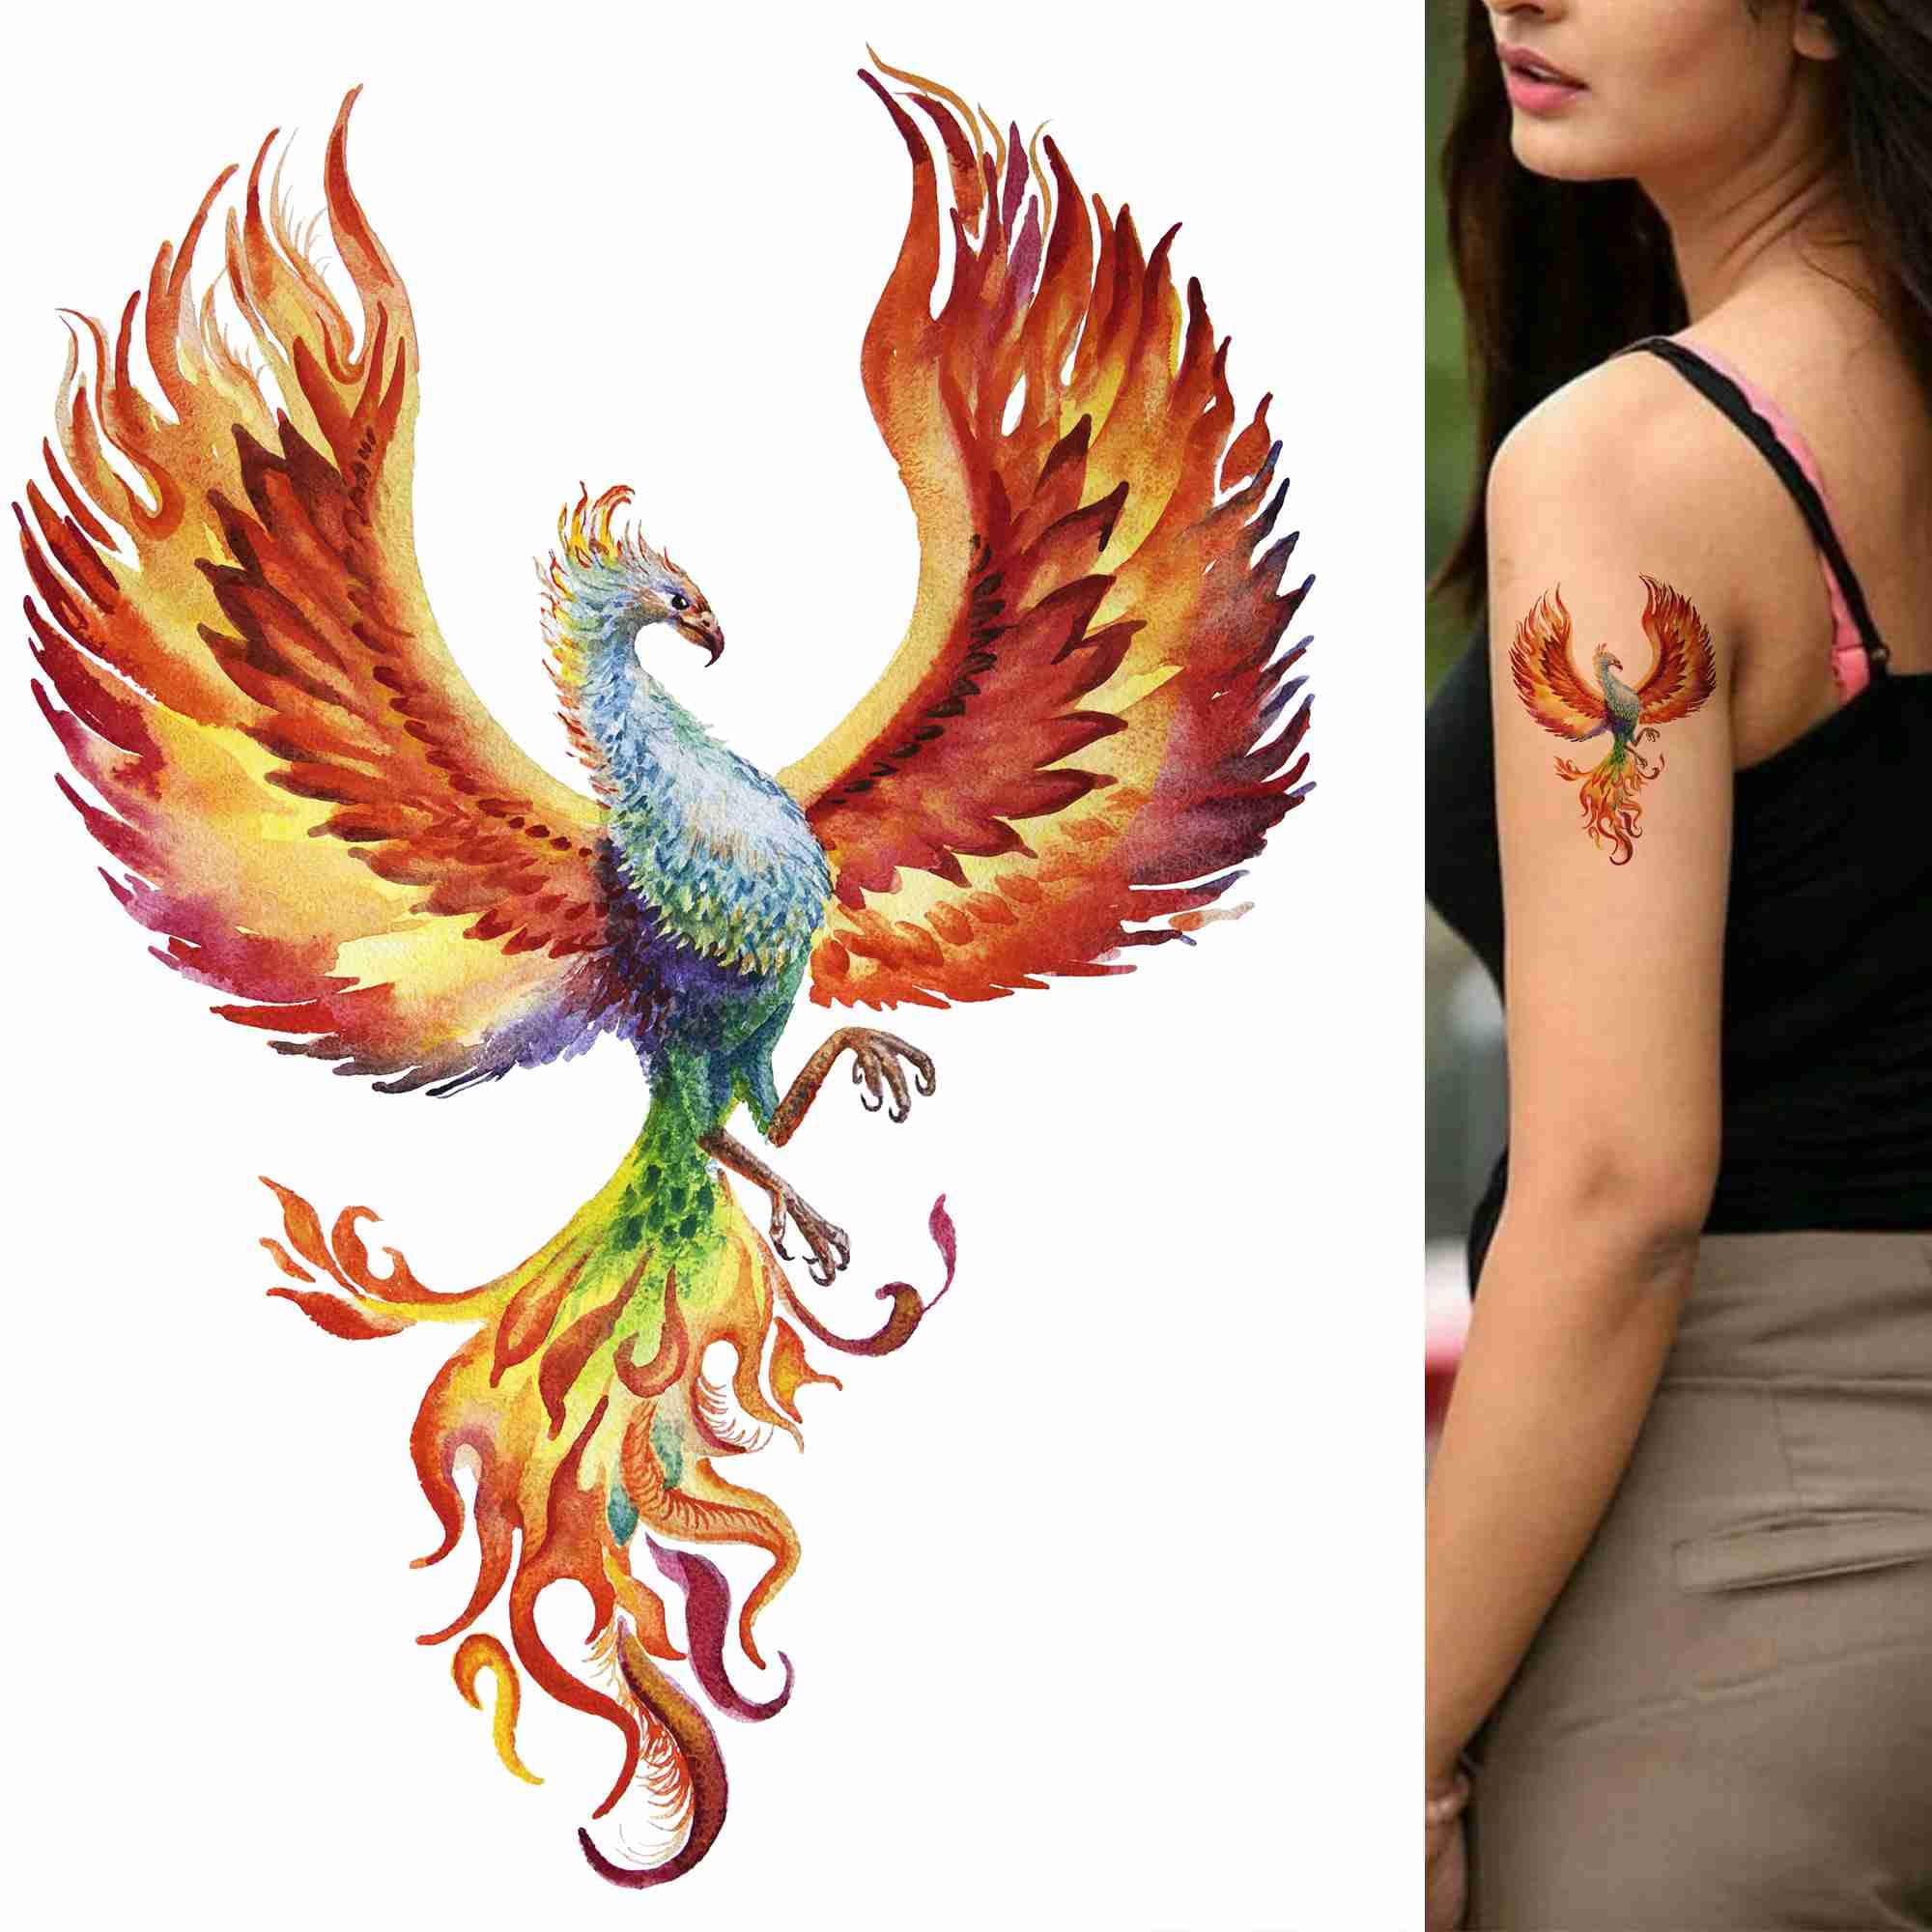 Phoenix Color Tattoo🔥🔥 | Welcome To A.S.O Tattoo Studio💙🙏🏻 Phoenix  Color Tattoo🔥 Artist Aung Swe Oo | By A.S.O Tattoo & Piercing Supply  ShopFacebook